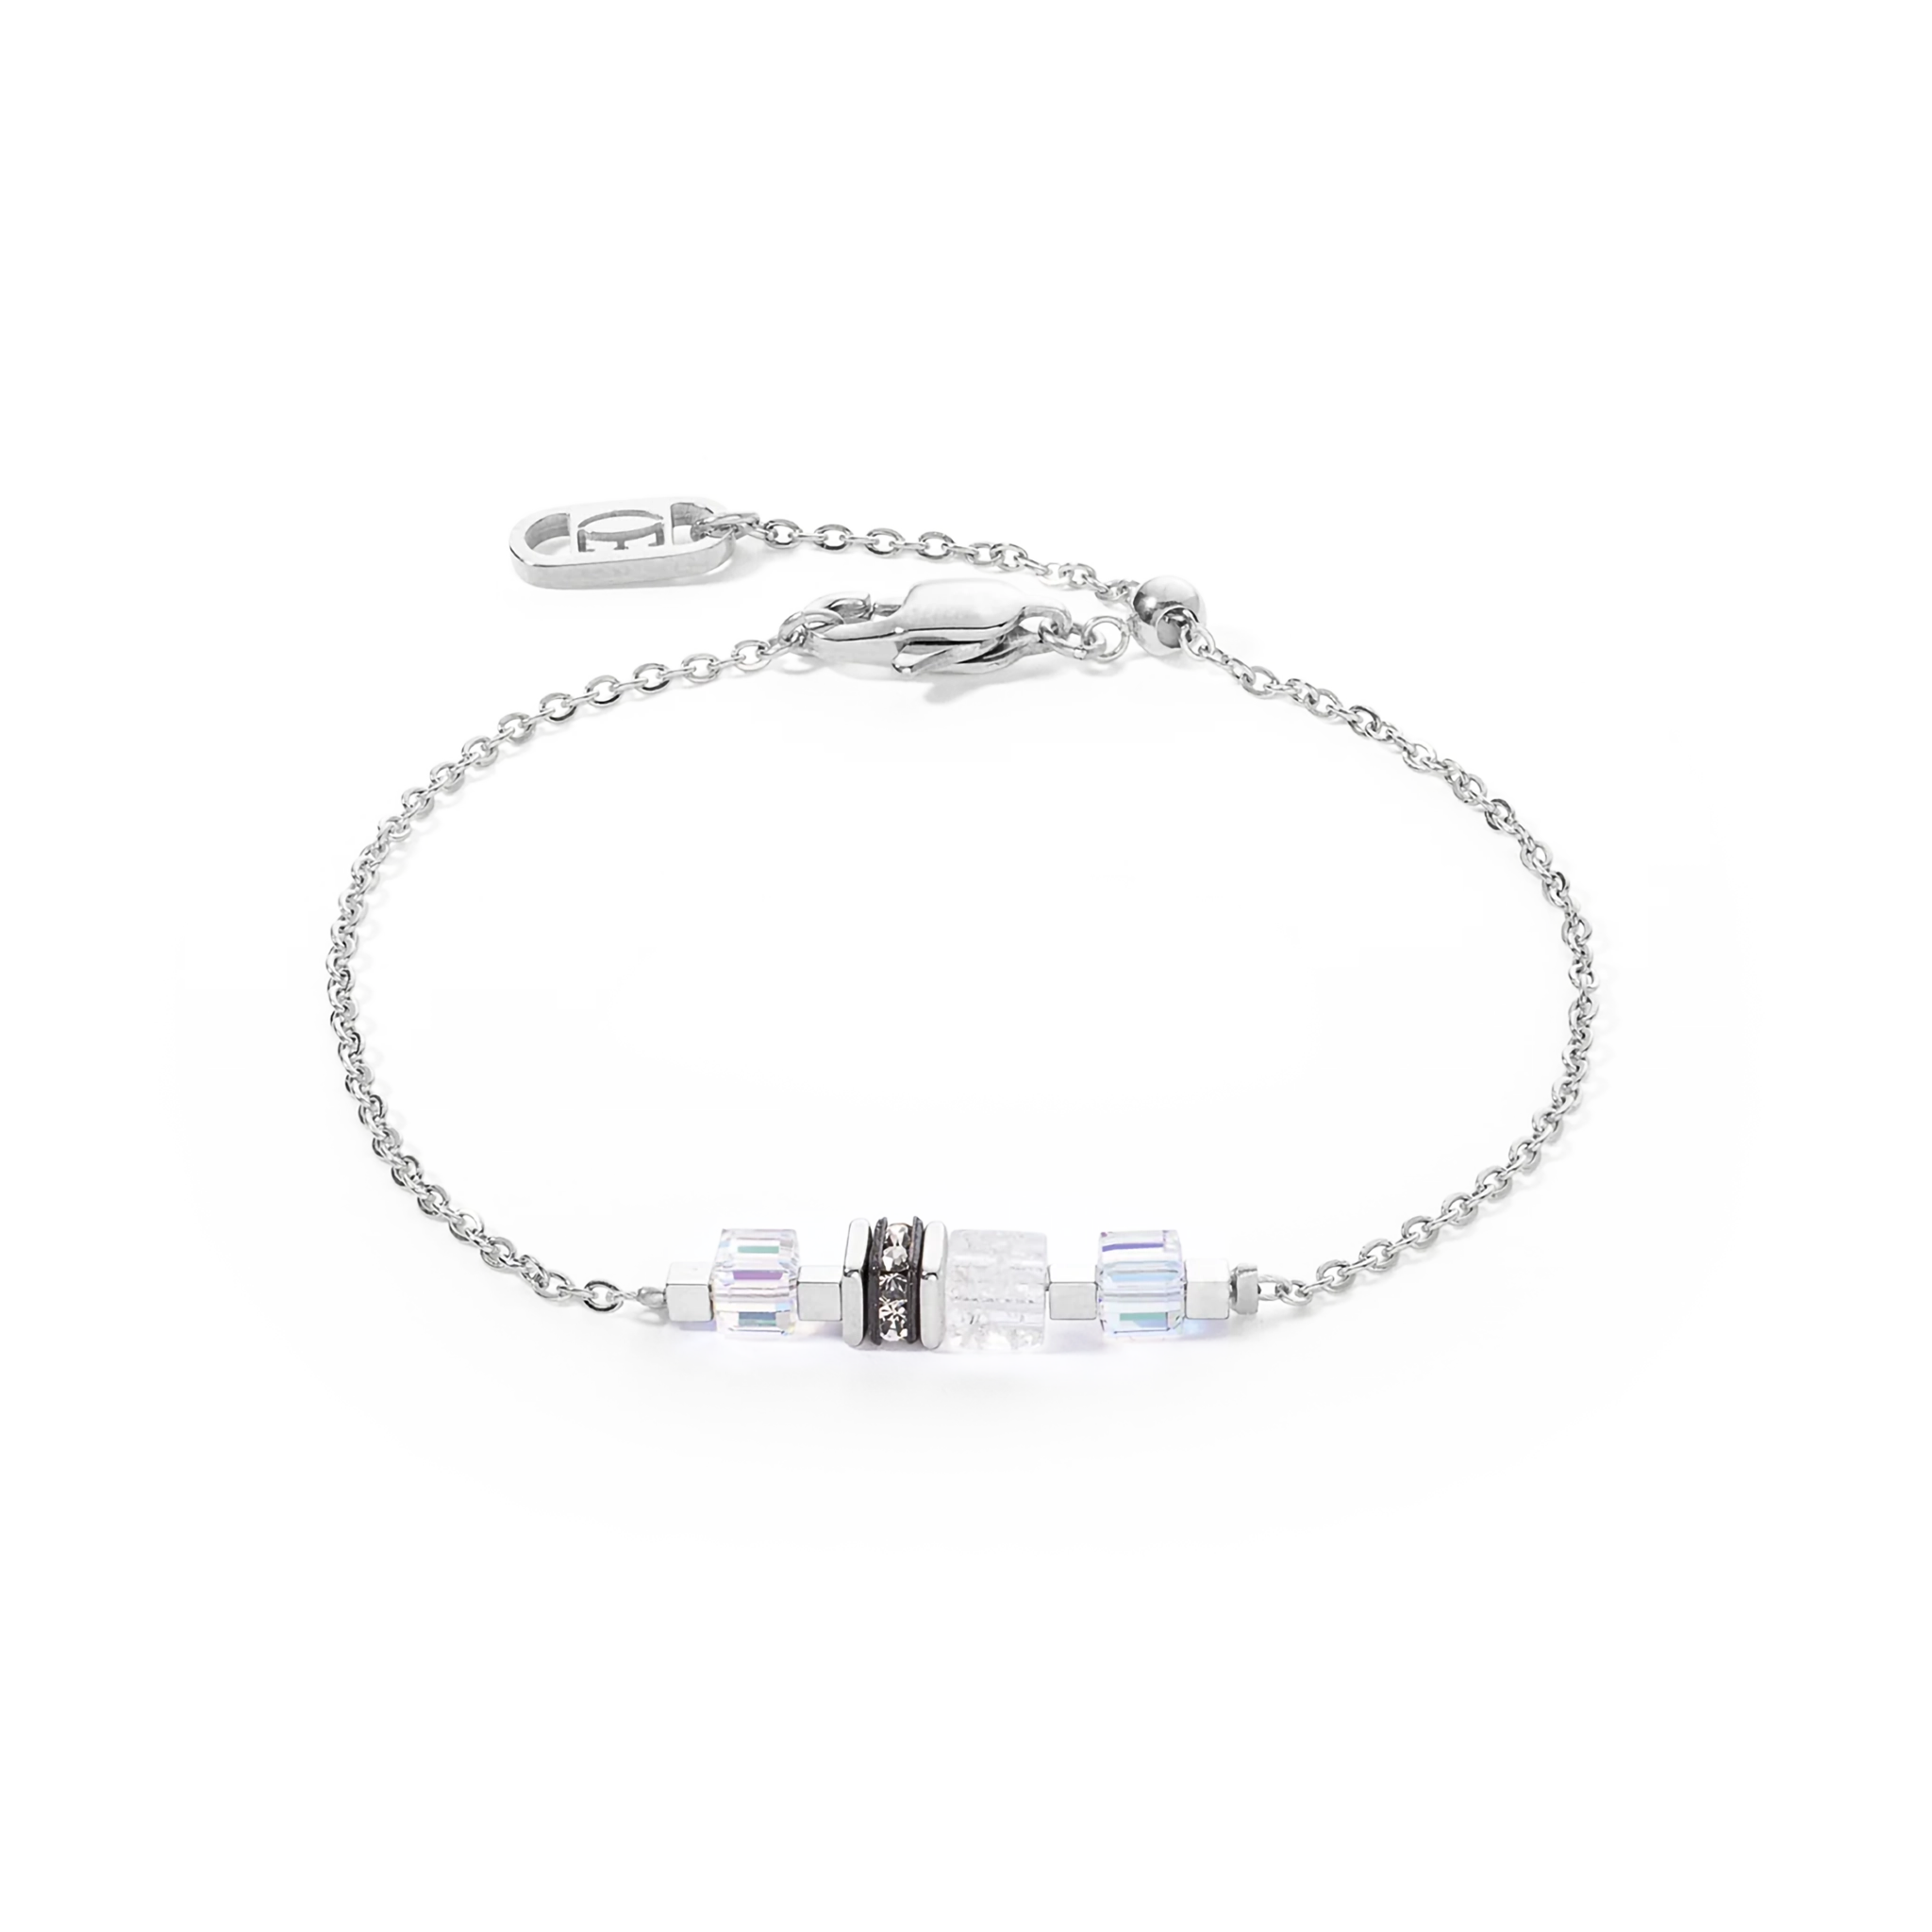 A silver chain bracelet with white cube shaped stones